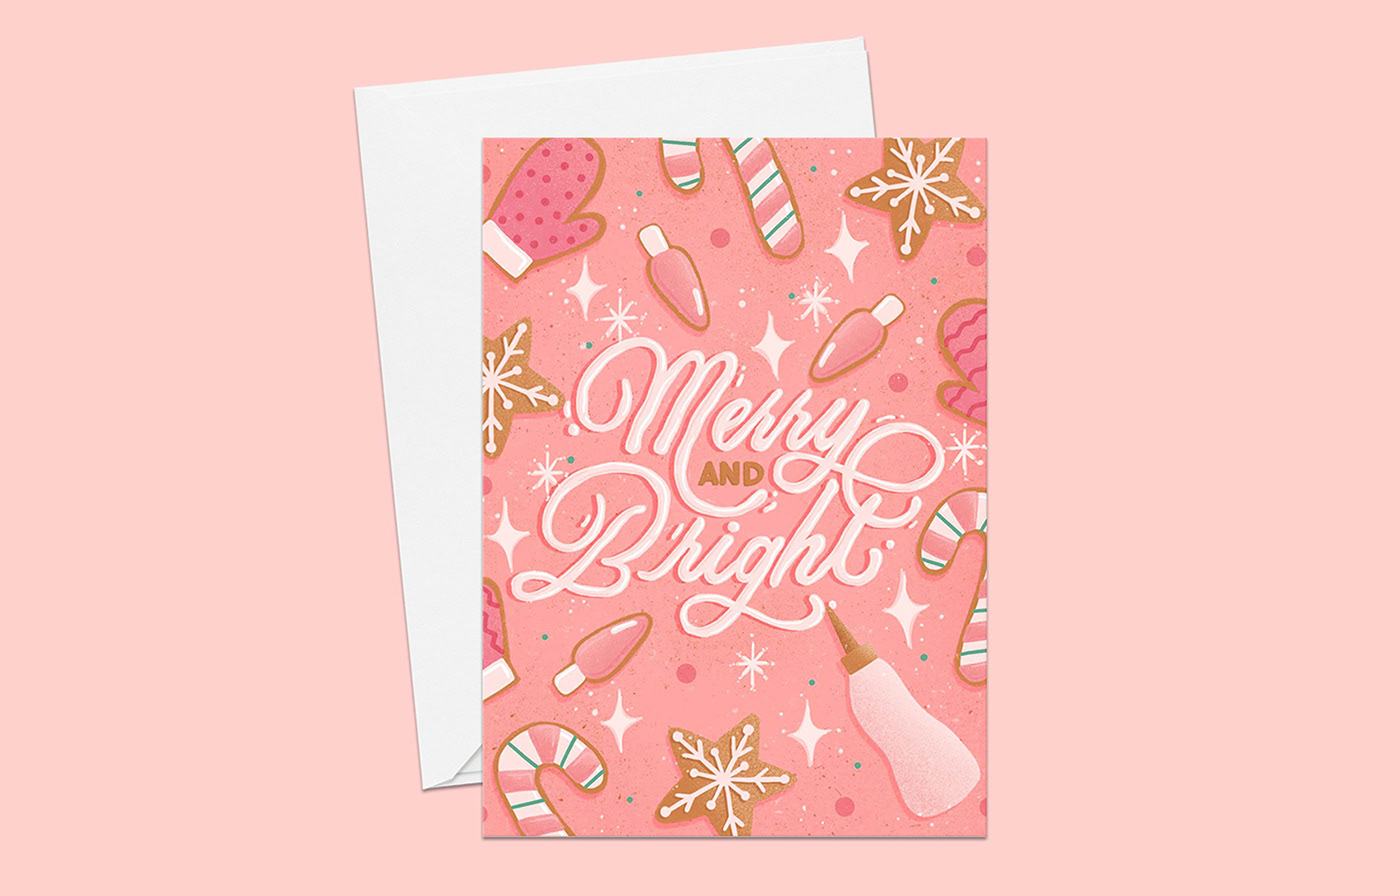 Greeting card featuring festive frosting hand lettering and cookies